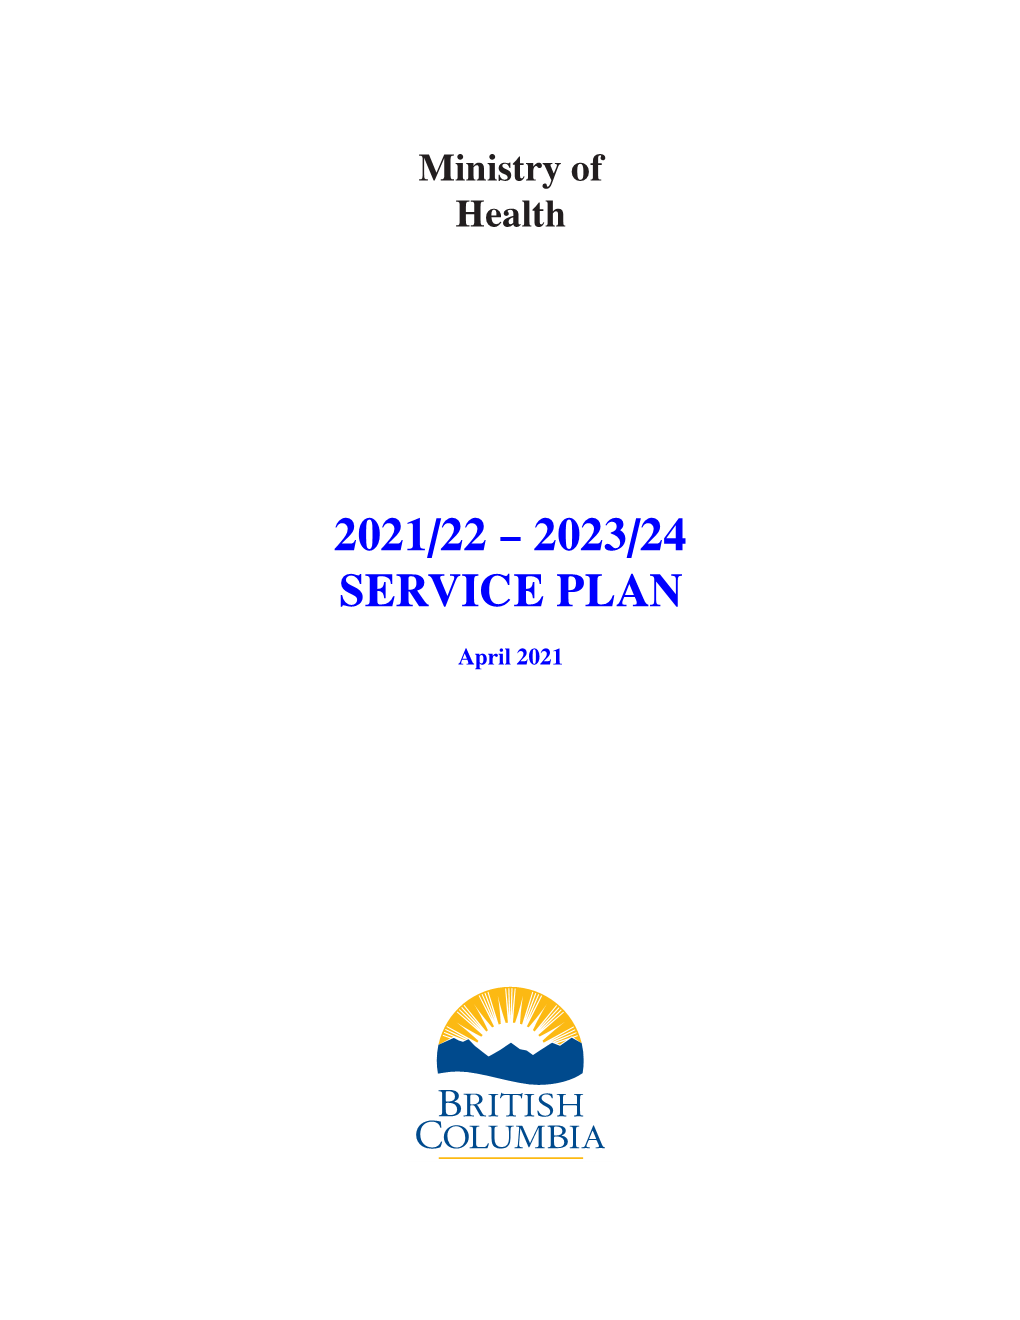 Ministry of Health 2021/22 – 2023/24 Service Plan Was Prepared Under My Direction in Accordance with the Budget Transparency and Accountability Act